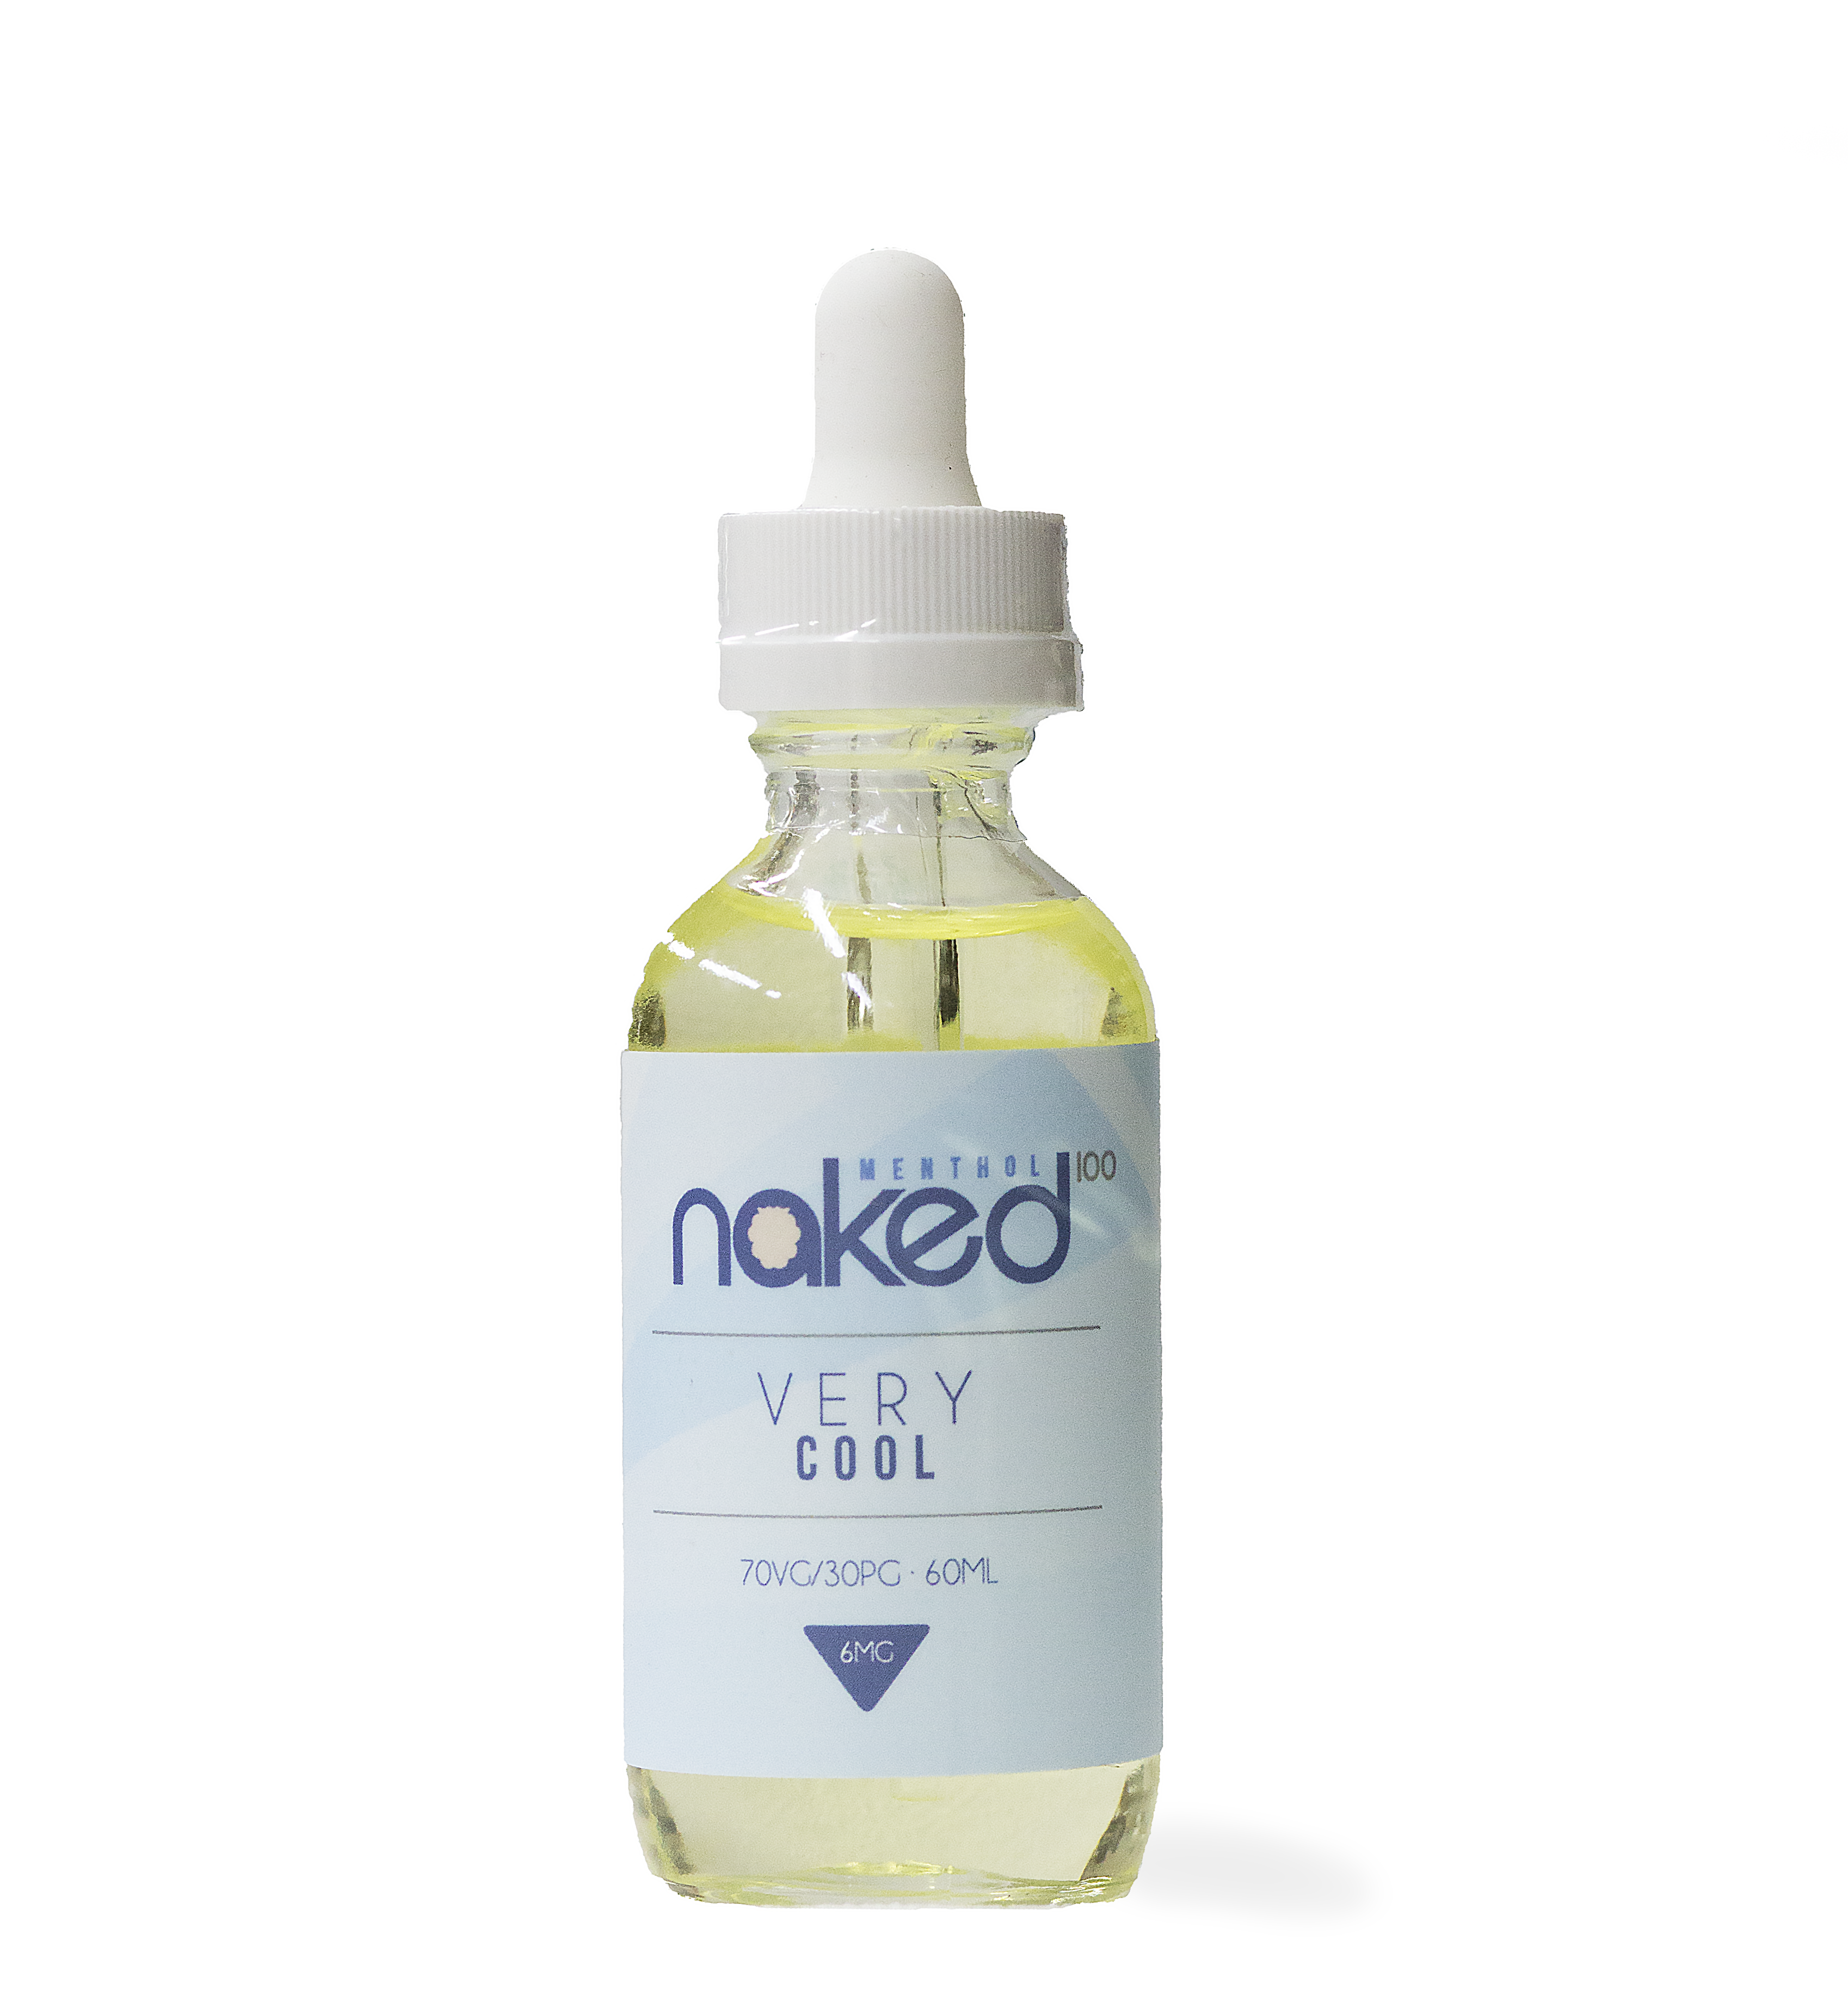 Get Your eJuice - Naked Menthol Very Cool